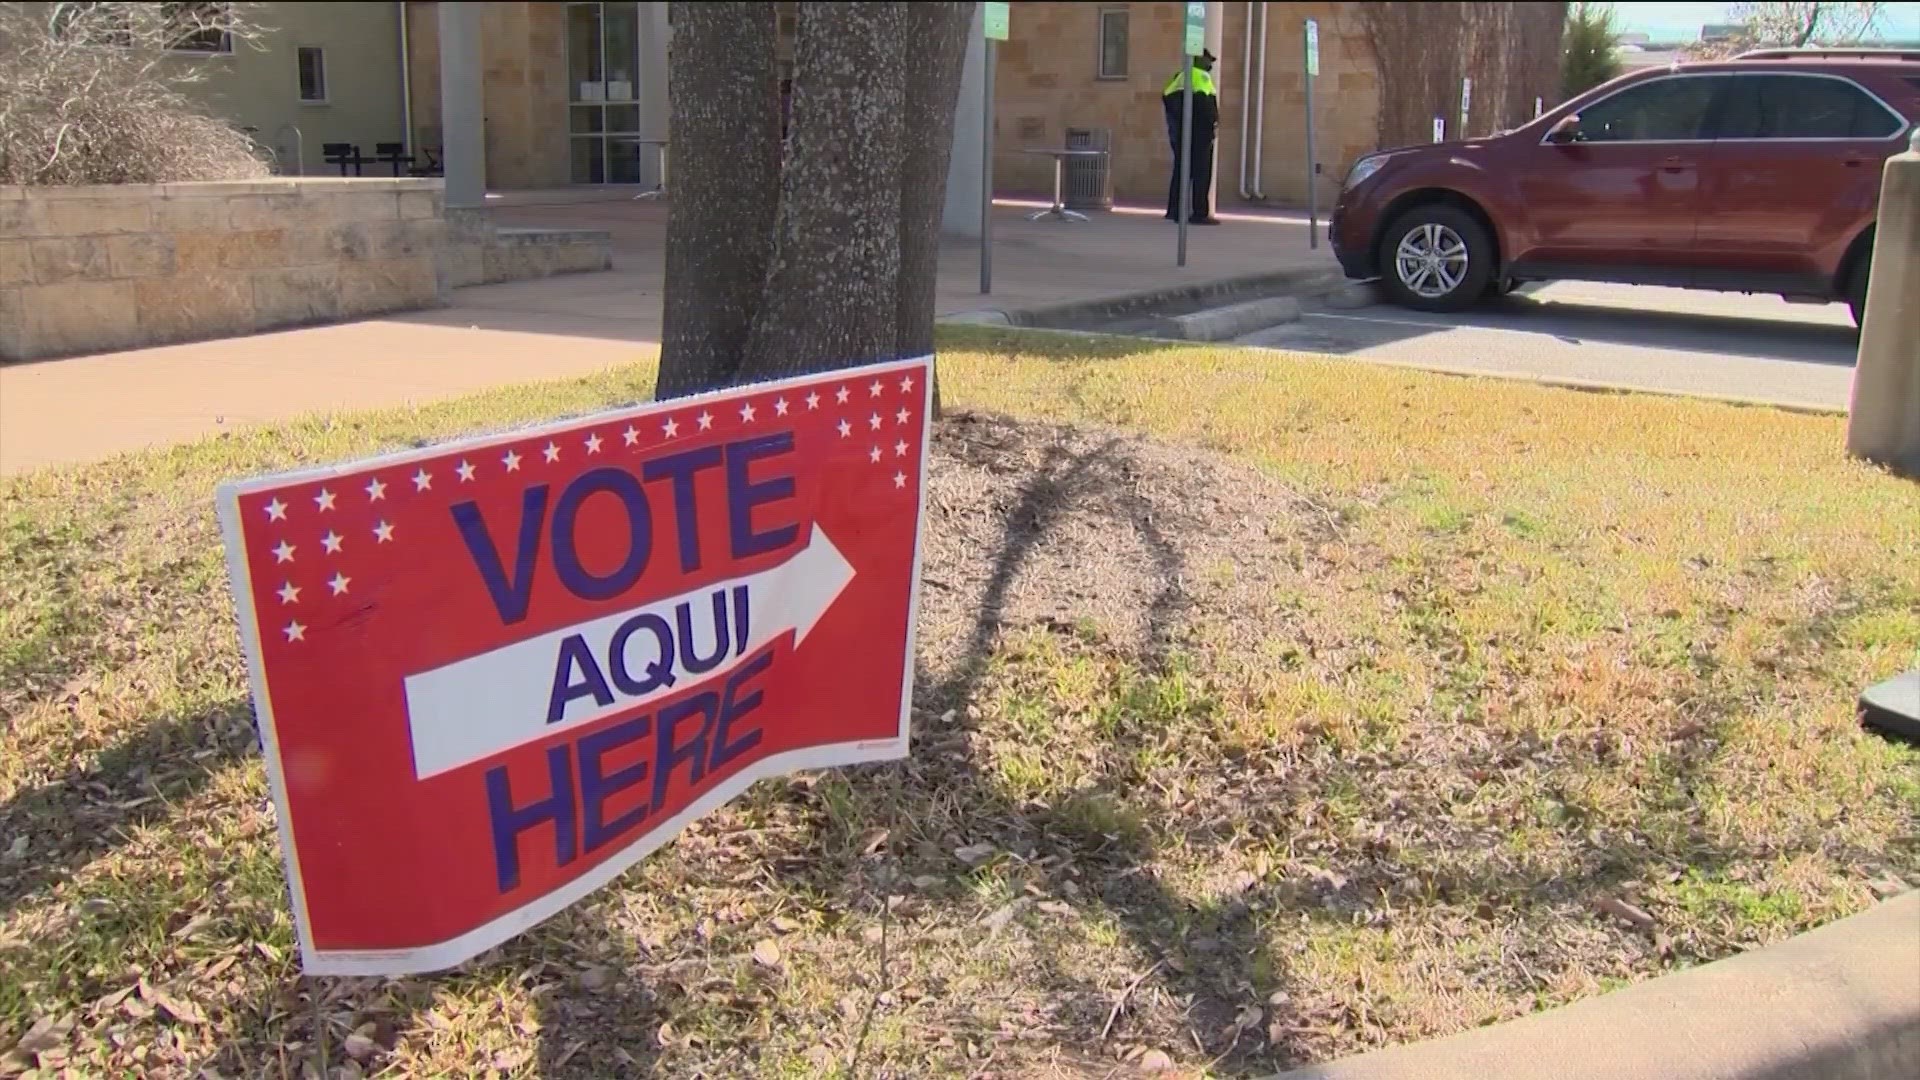 Texans will decide whether or not to pass 14 proposed amendments to the state constitution.